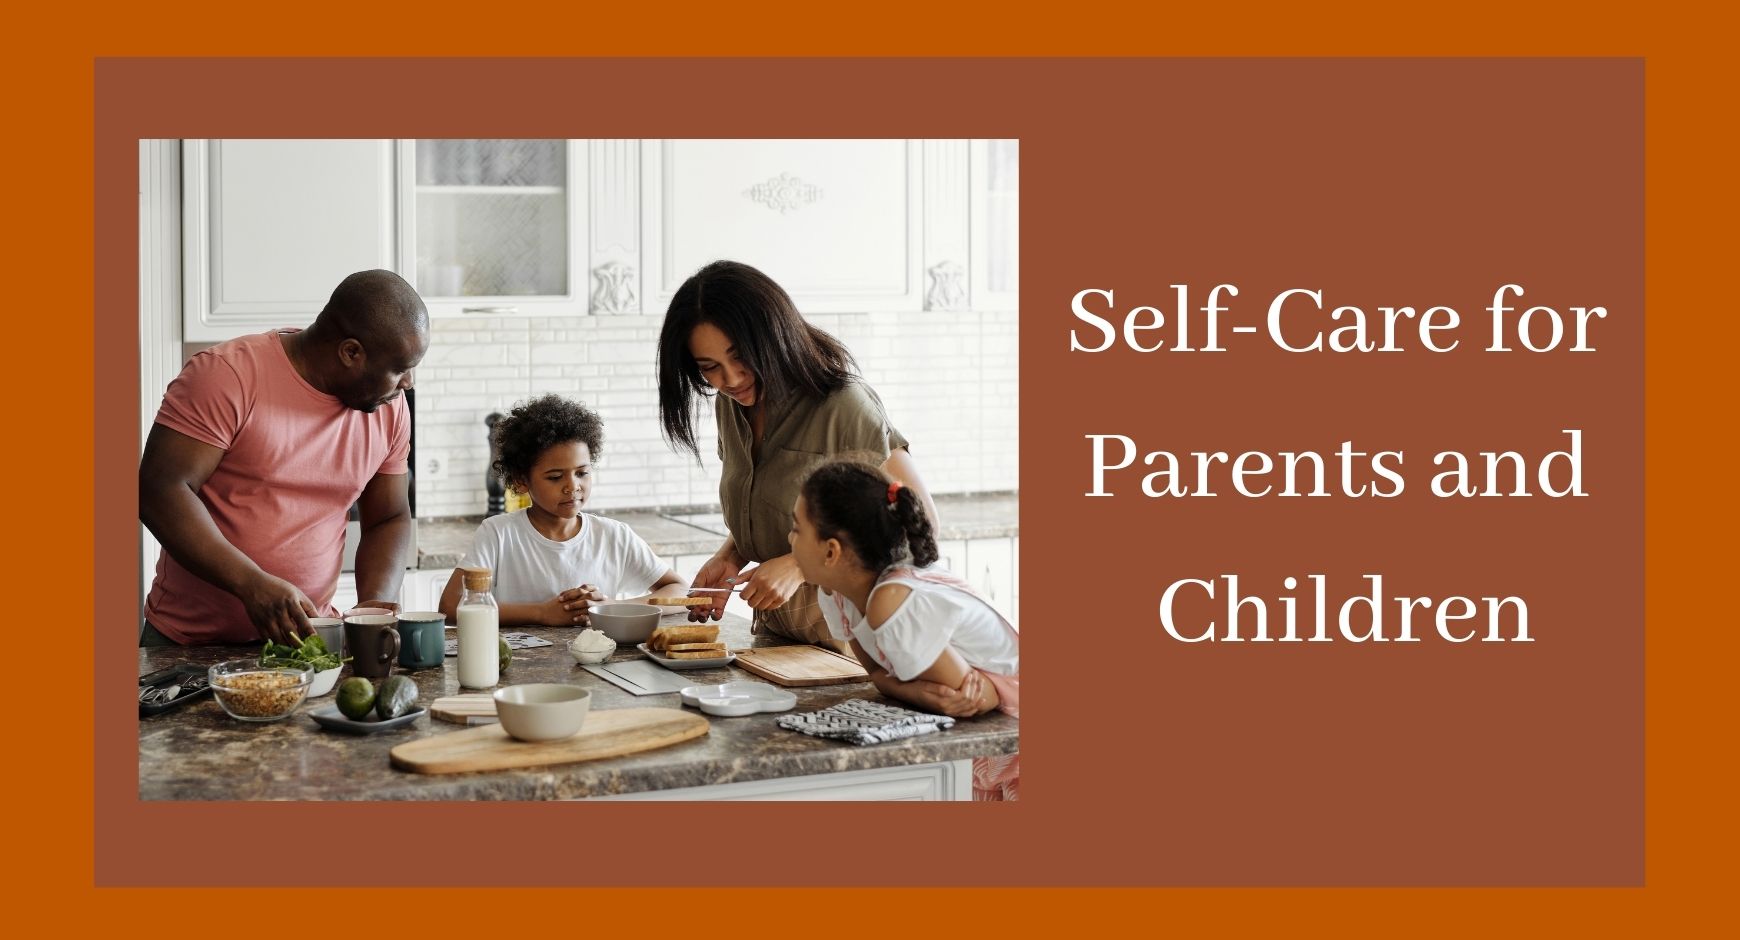 Parents with two children making toast onext to text that reads "Self-Care for Parents and Children" 